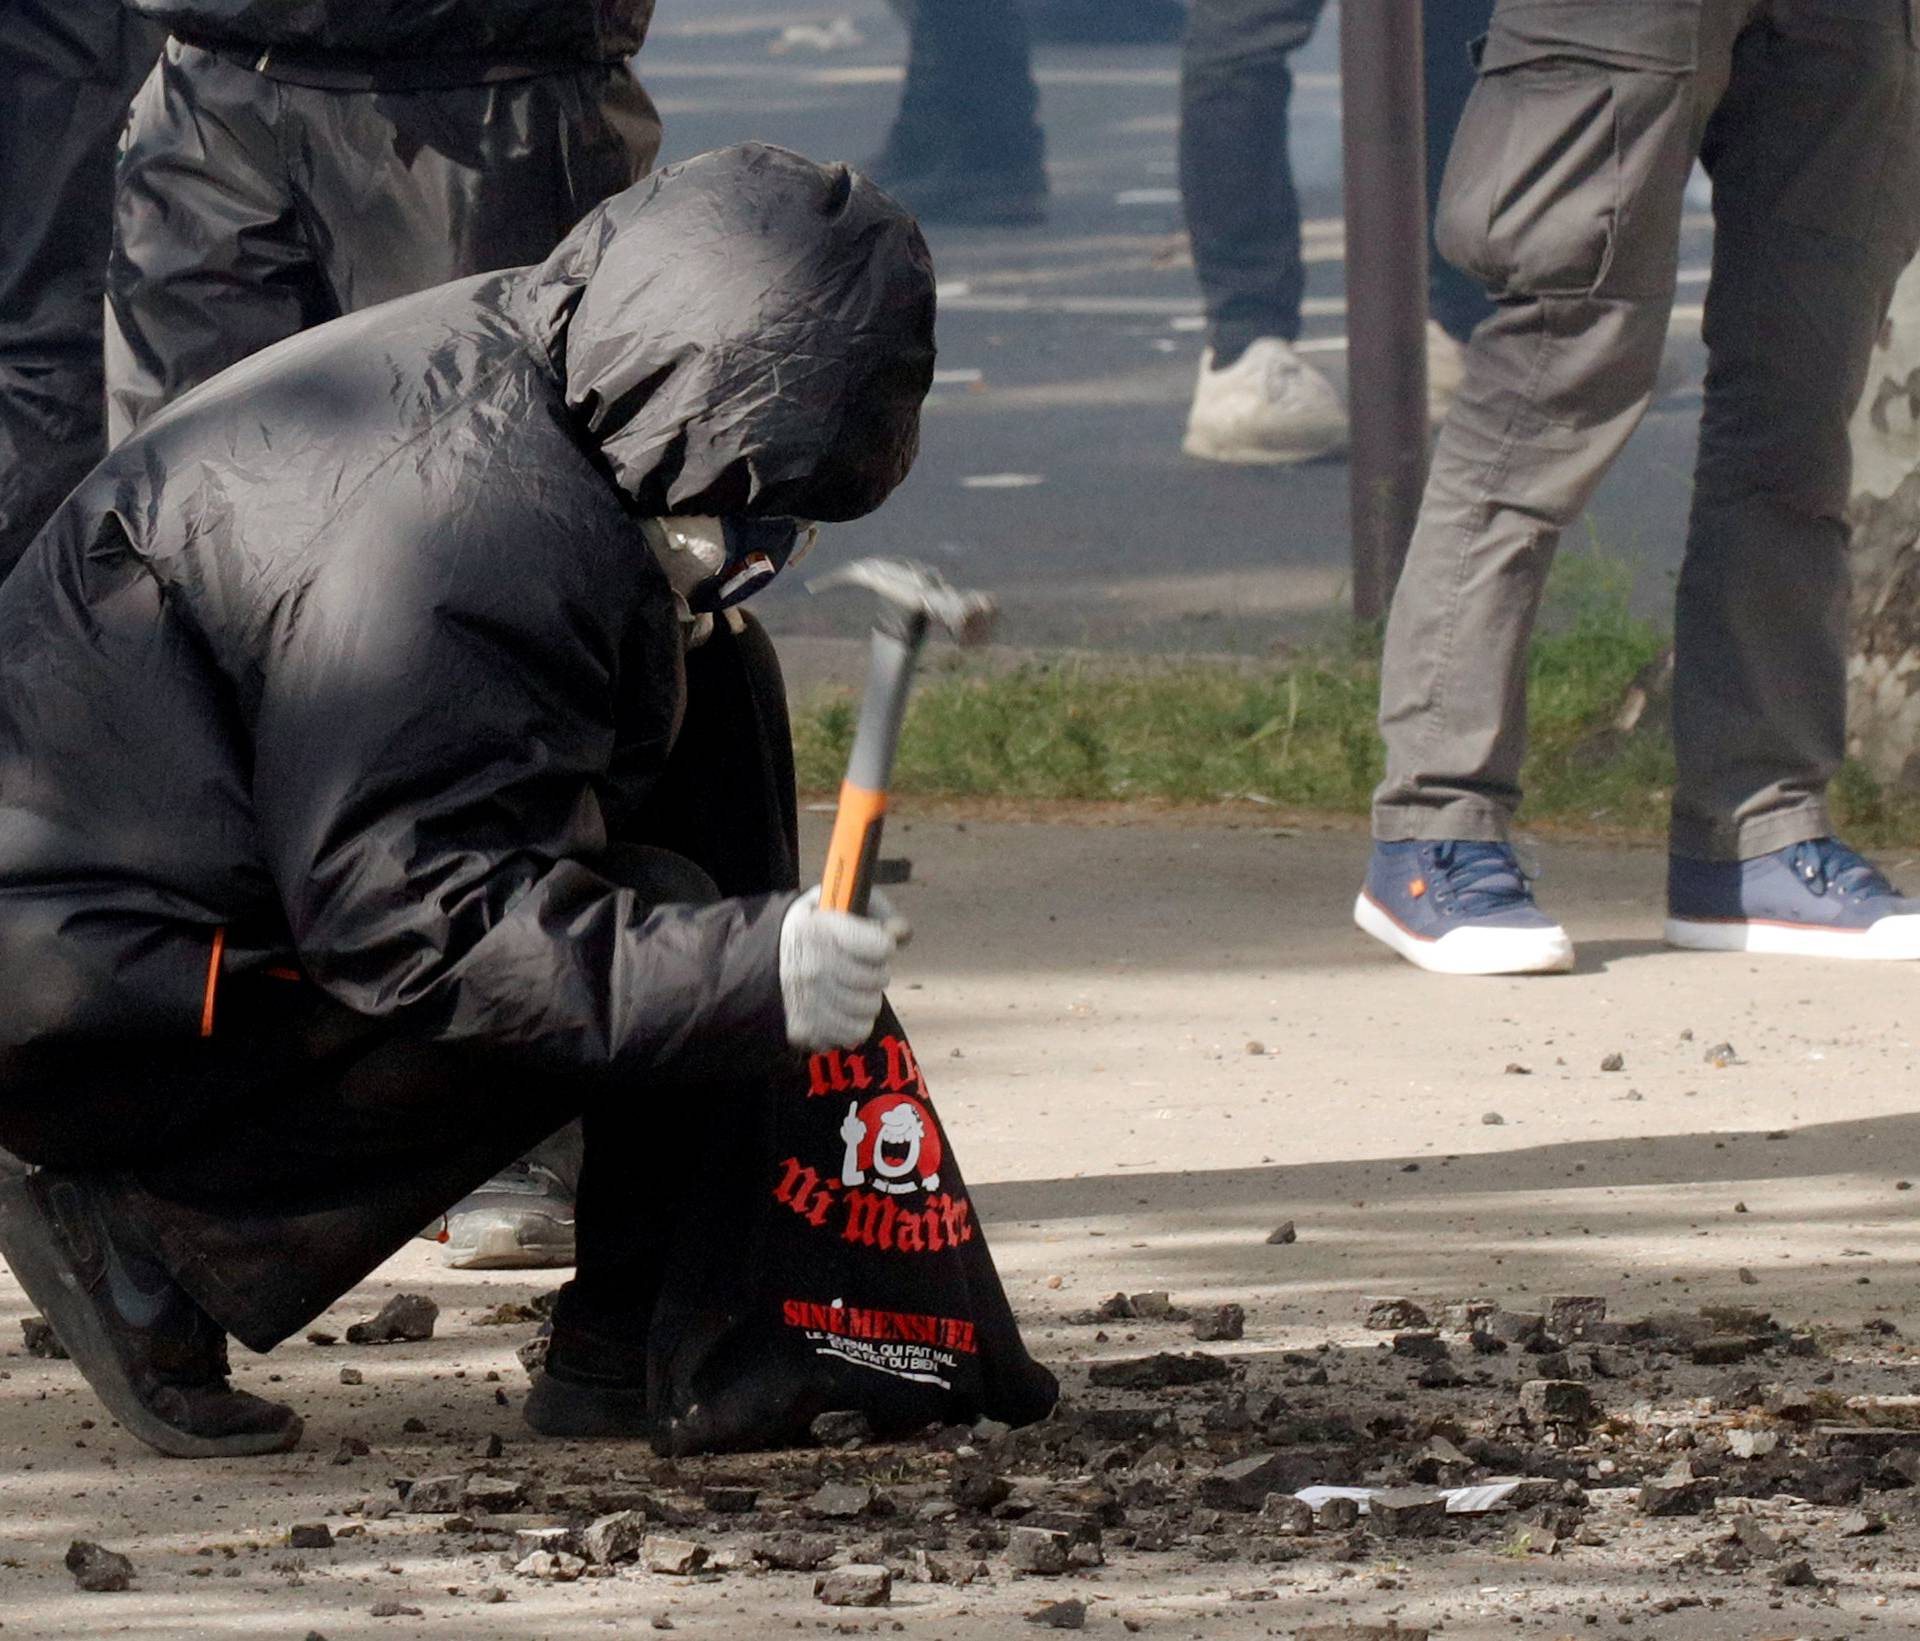 A masked and hooded protester uses a hammer to gather rocks during clashes with French CRS riot police at the May Day labour union rally in Paris